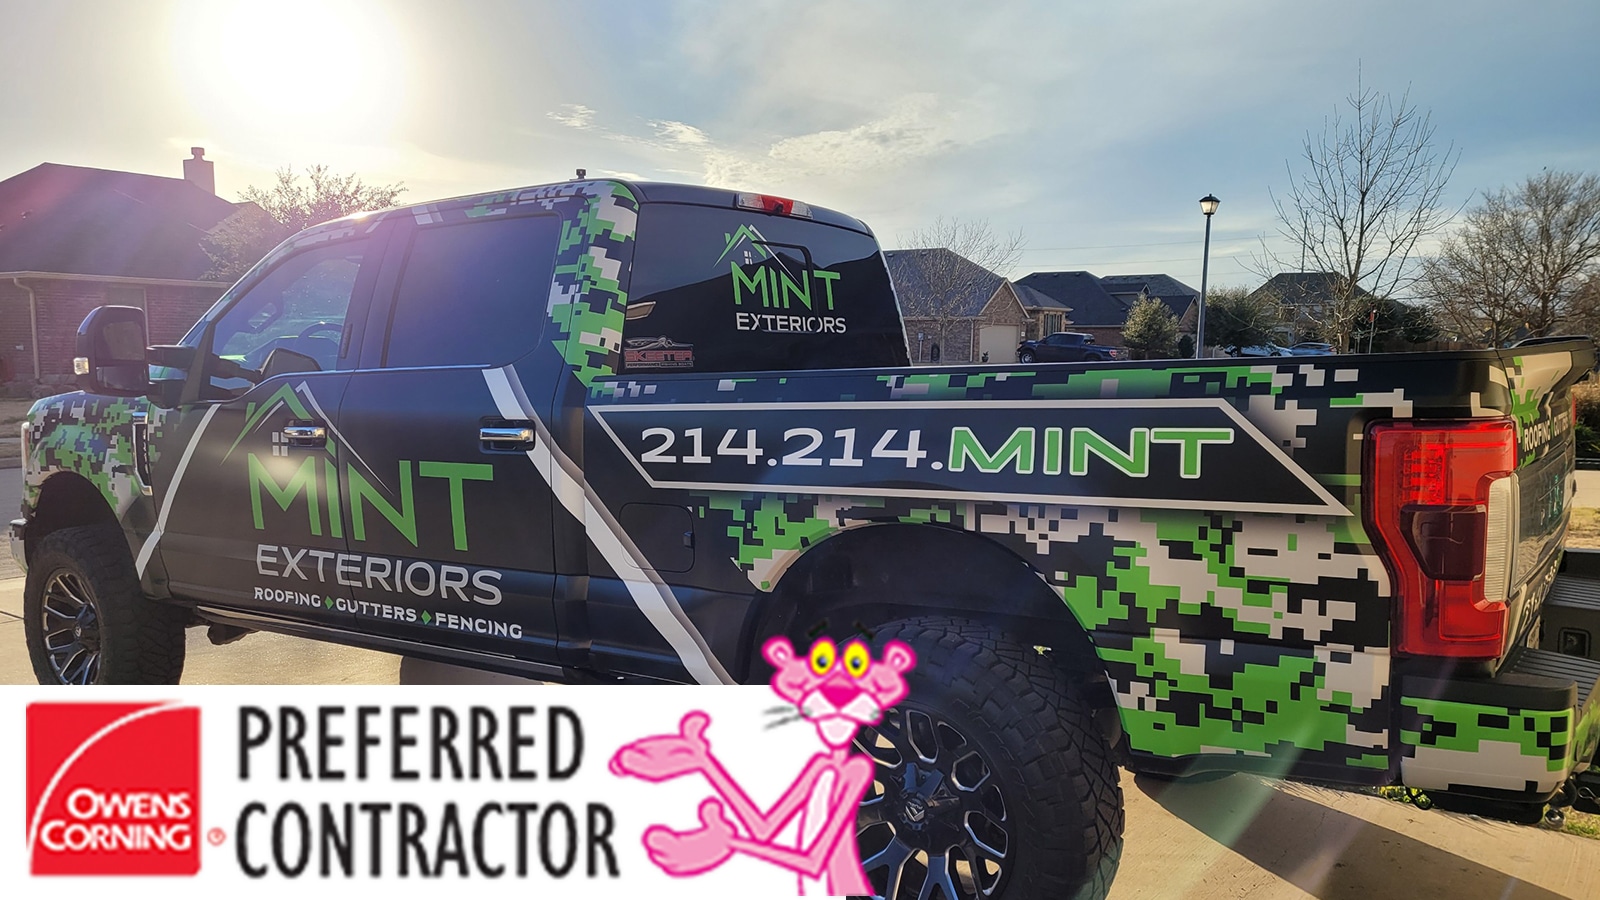 MINT Exteriors Is An Owens Corning Preferred Contractor